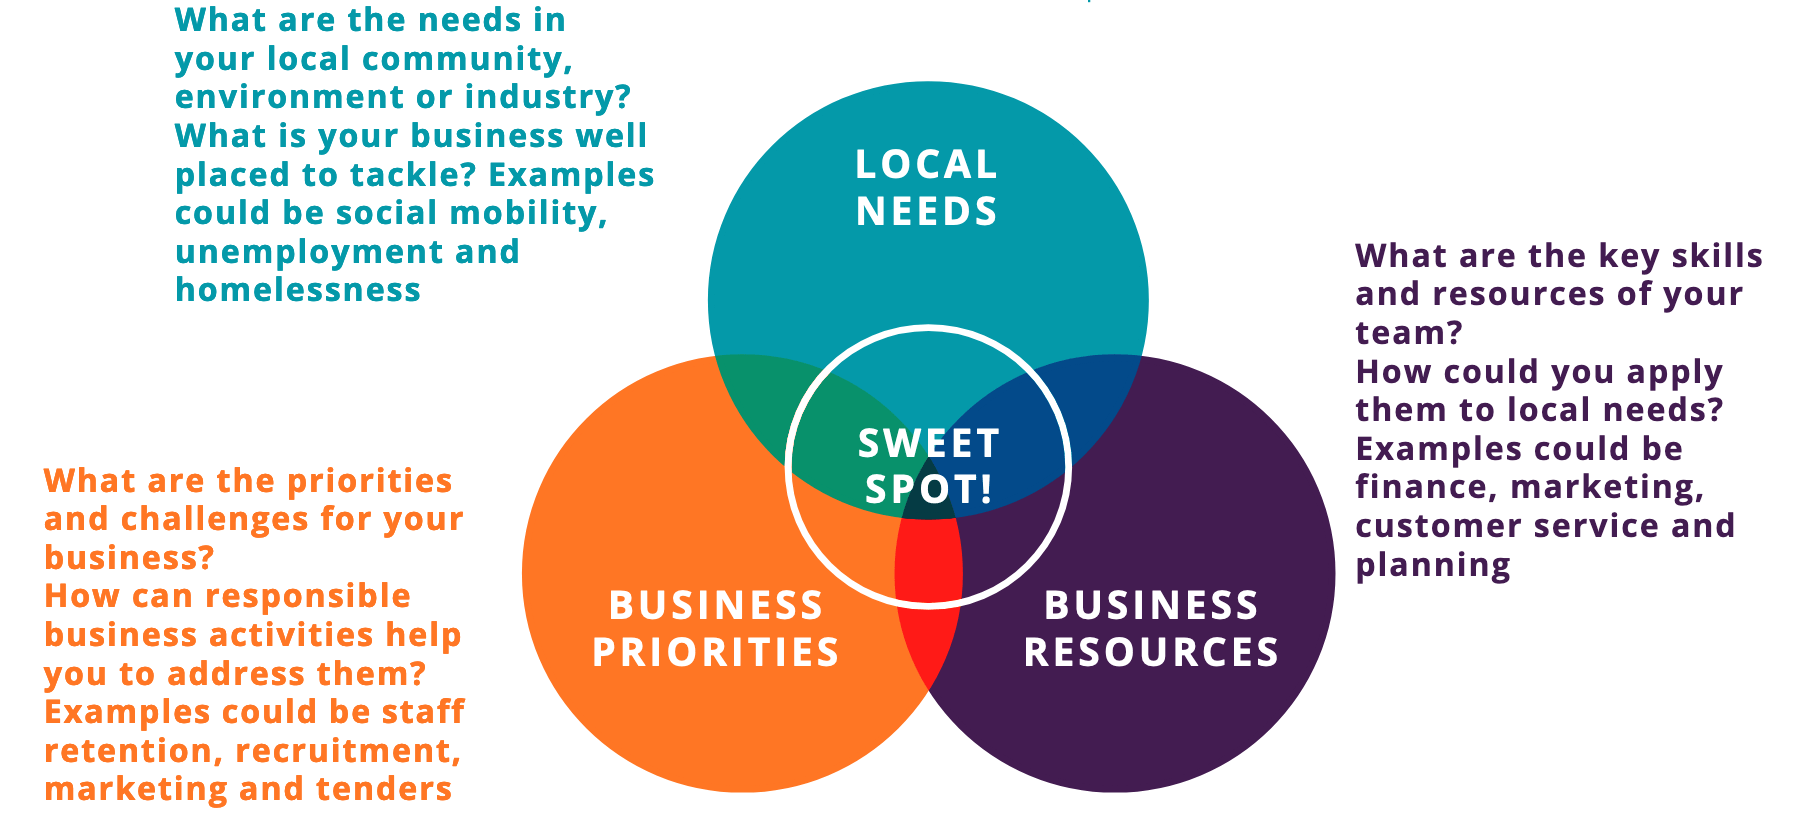 Find Your Responsible Business Sweet Spot - Heart of the City